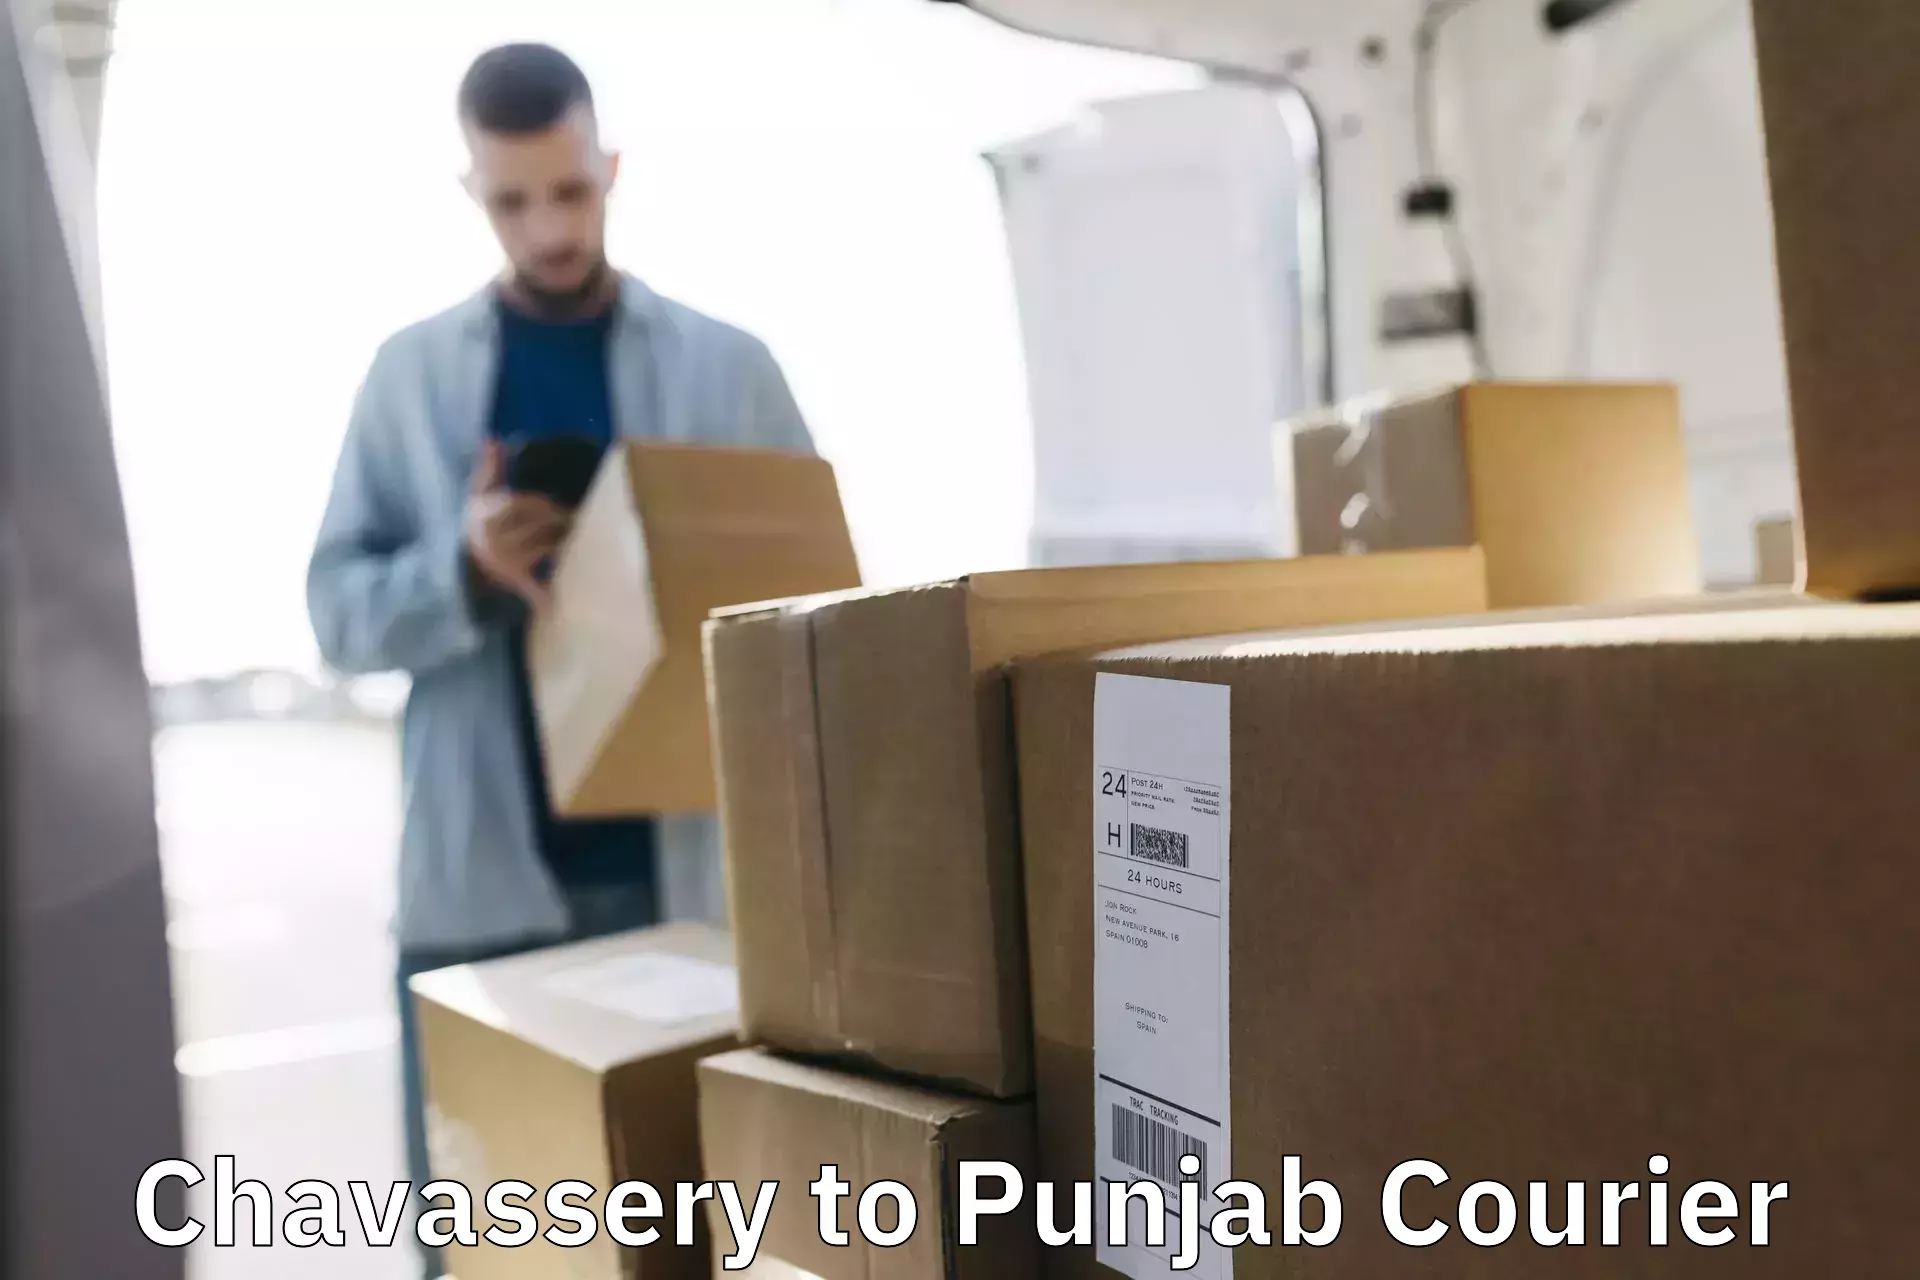 Efficient courier operations Chavassery to Faridkot